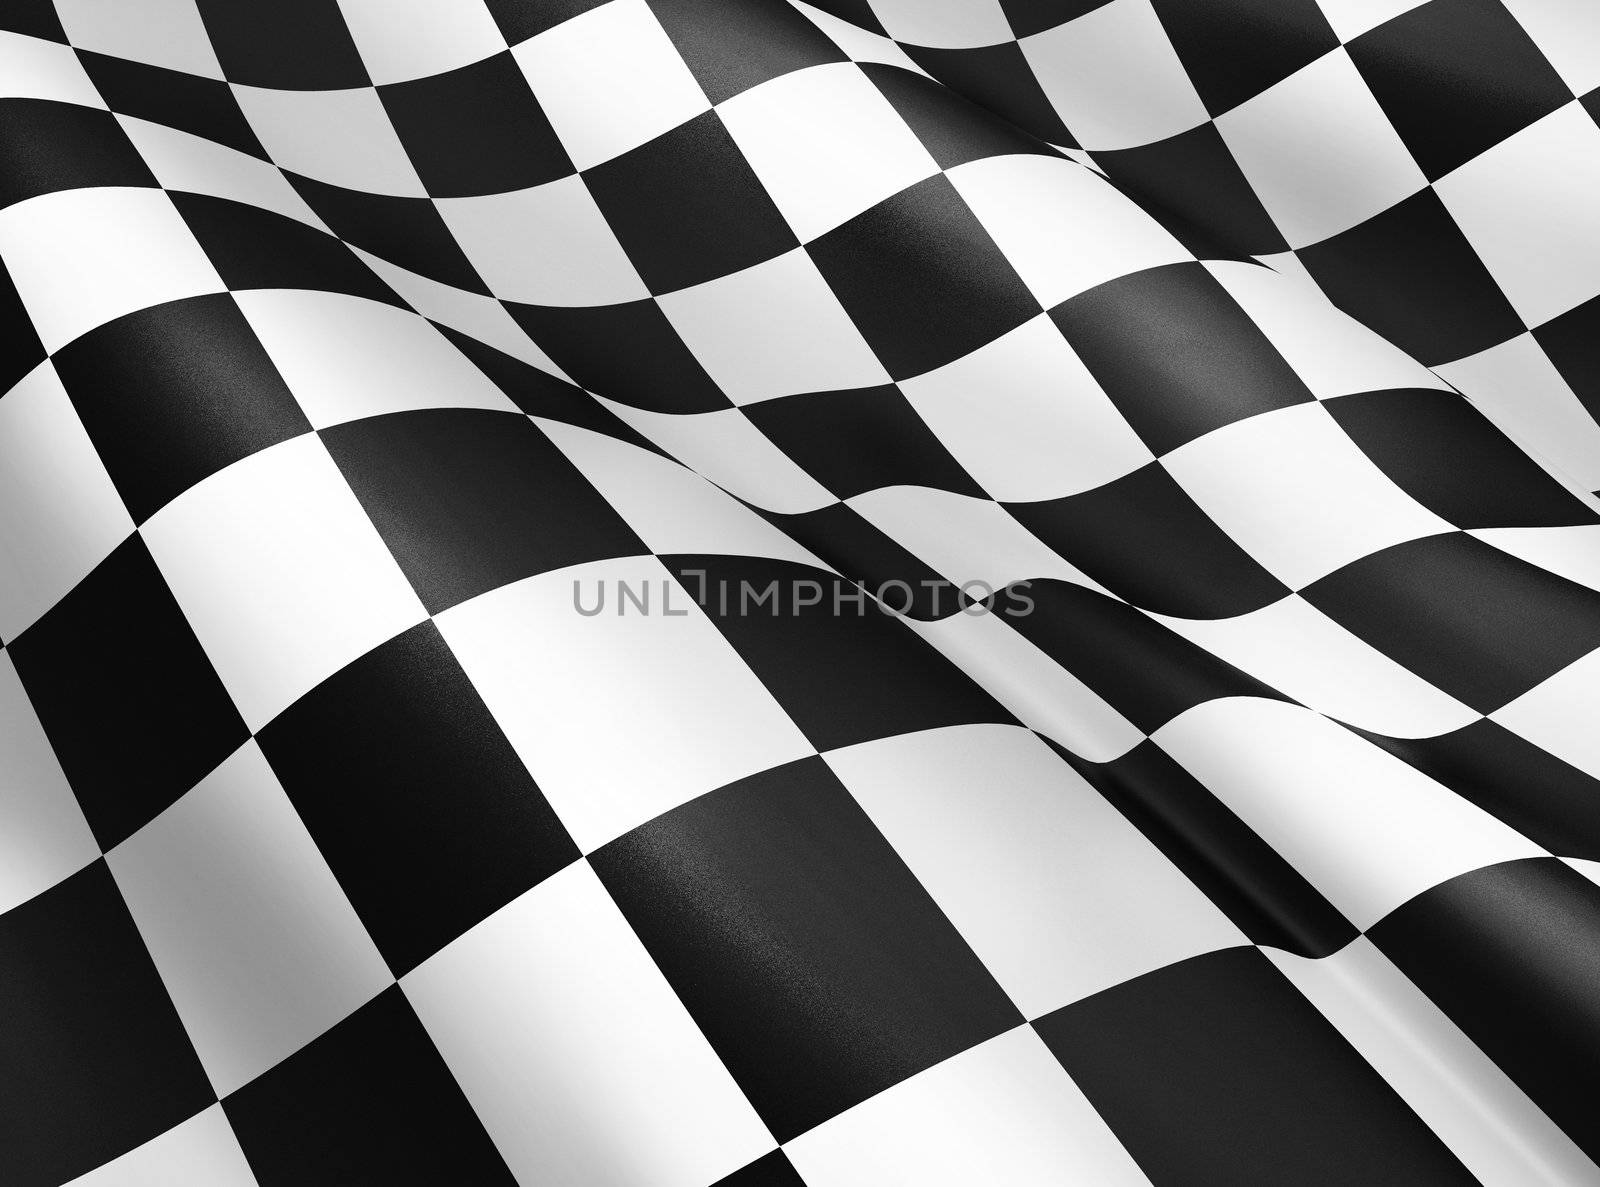 Black and white checkered flag background, start and finish flag, sport and race theme, wavy cloth and textile, victory lap symbol.